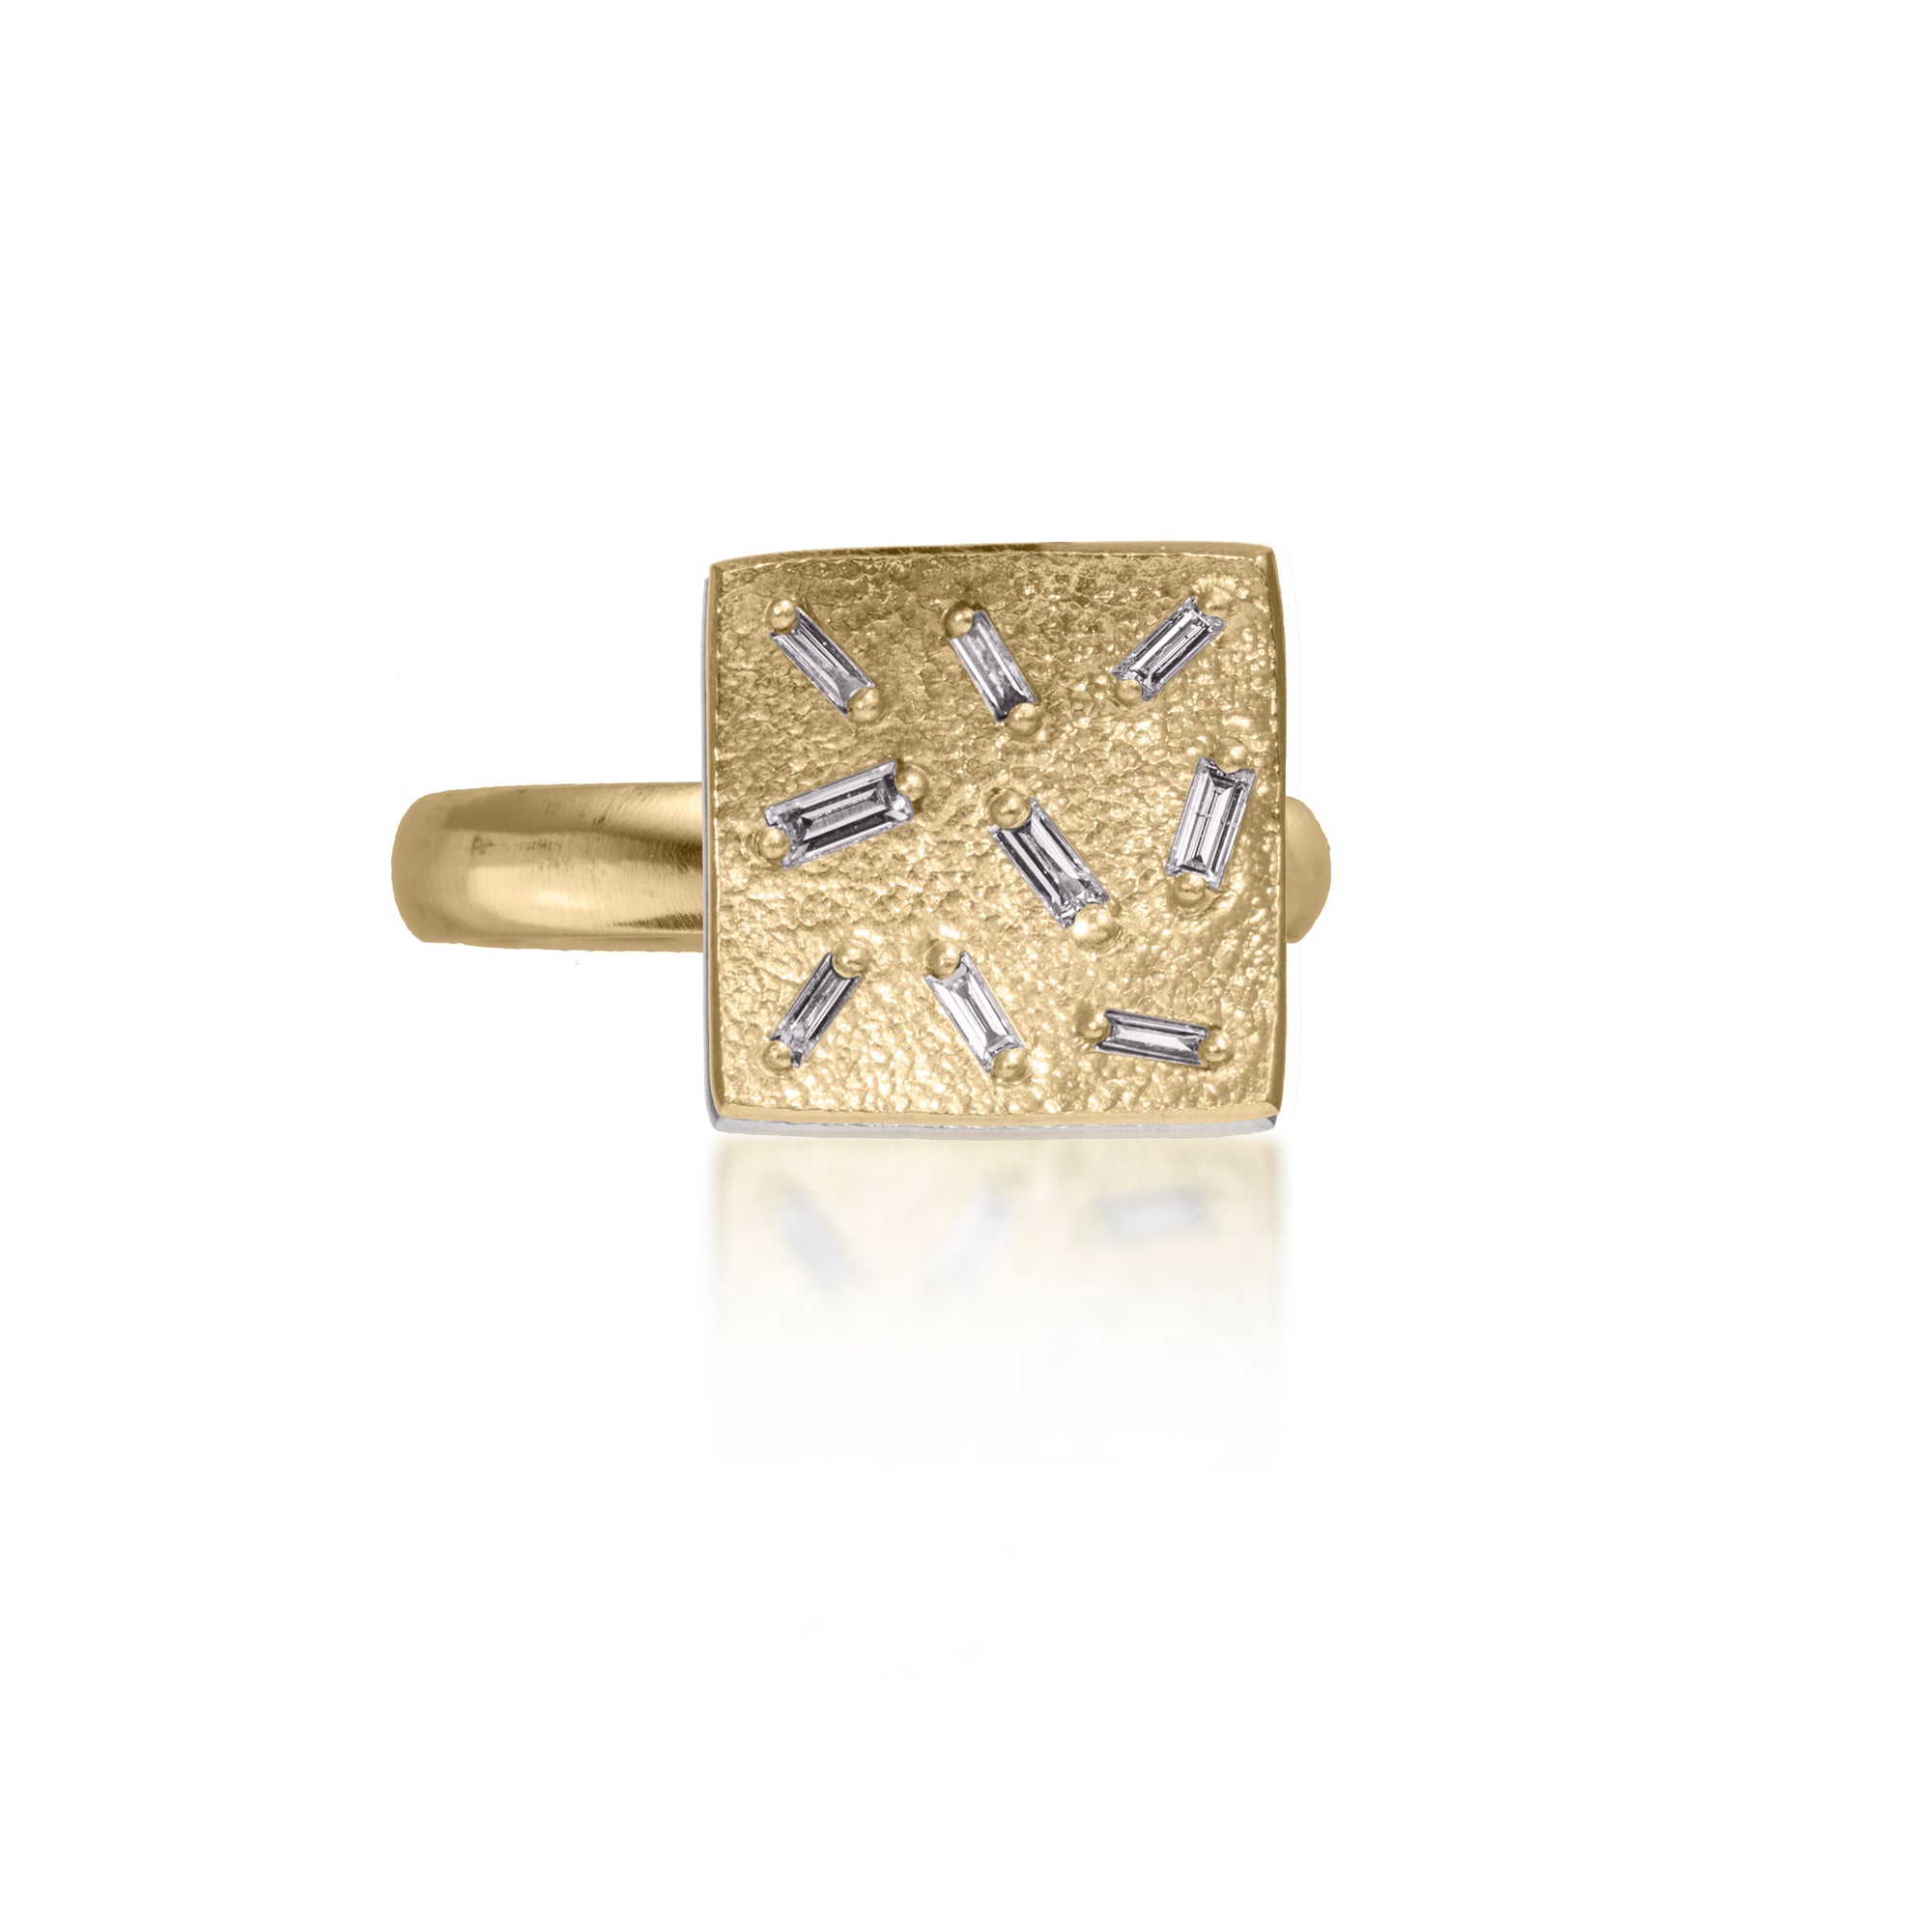 This small square pendant ring is set with 9 white diamond baguettes. It is available in three richly textured color ways, oxidized silver, 18k gold and palladium. The random angles of the baguettes catch the light in exciting ways when worn. 0.25 tcw.